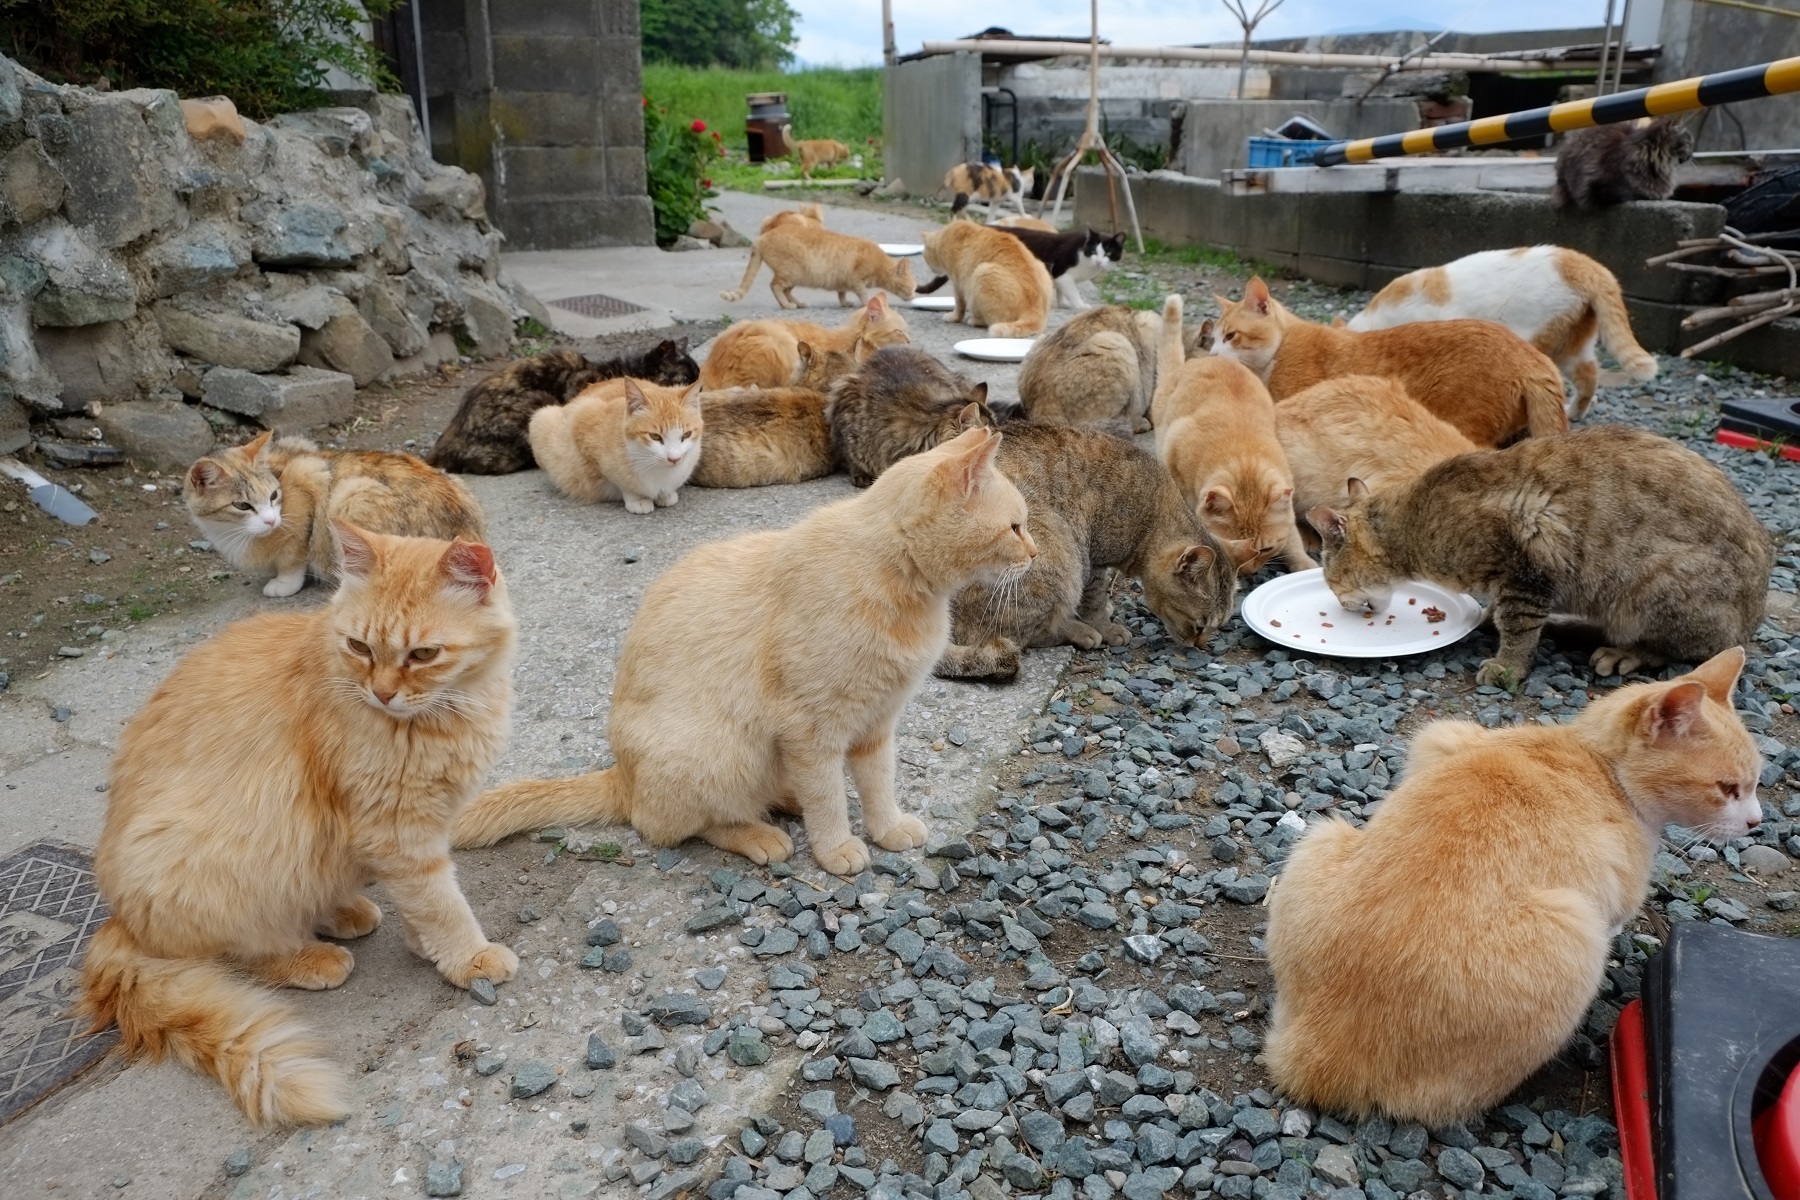 <p>Fun fact: Japan is home to almost a <a href="https://www.theatlantic.com/photo/2015/03/a-visit-to-aoshima-a-cat-island-in-japan/386647/">dozen “cat islands,”</a> where wild felines outnumber the human population. The most famous of these communities is Aoshima, where over 100 cats outnumber their human neighbours by six to one. </p> <p>Cats were first introduced to this tiny fishing community to keep vermin at bay, but their population has boomed ever since. Aoshima is now a popular attraction for tourists, but residents <a href="https://www.youtube.com/watch?v=Ho2htMvL3gc&ab_channel=BBCNews">worry</a> that the influx of visitors could disrupt their quiet lives. </p>